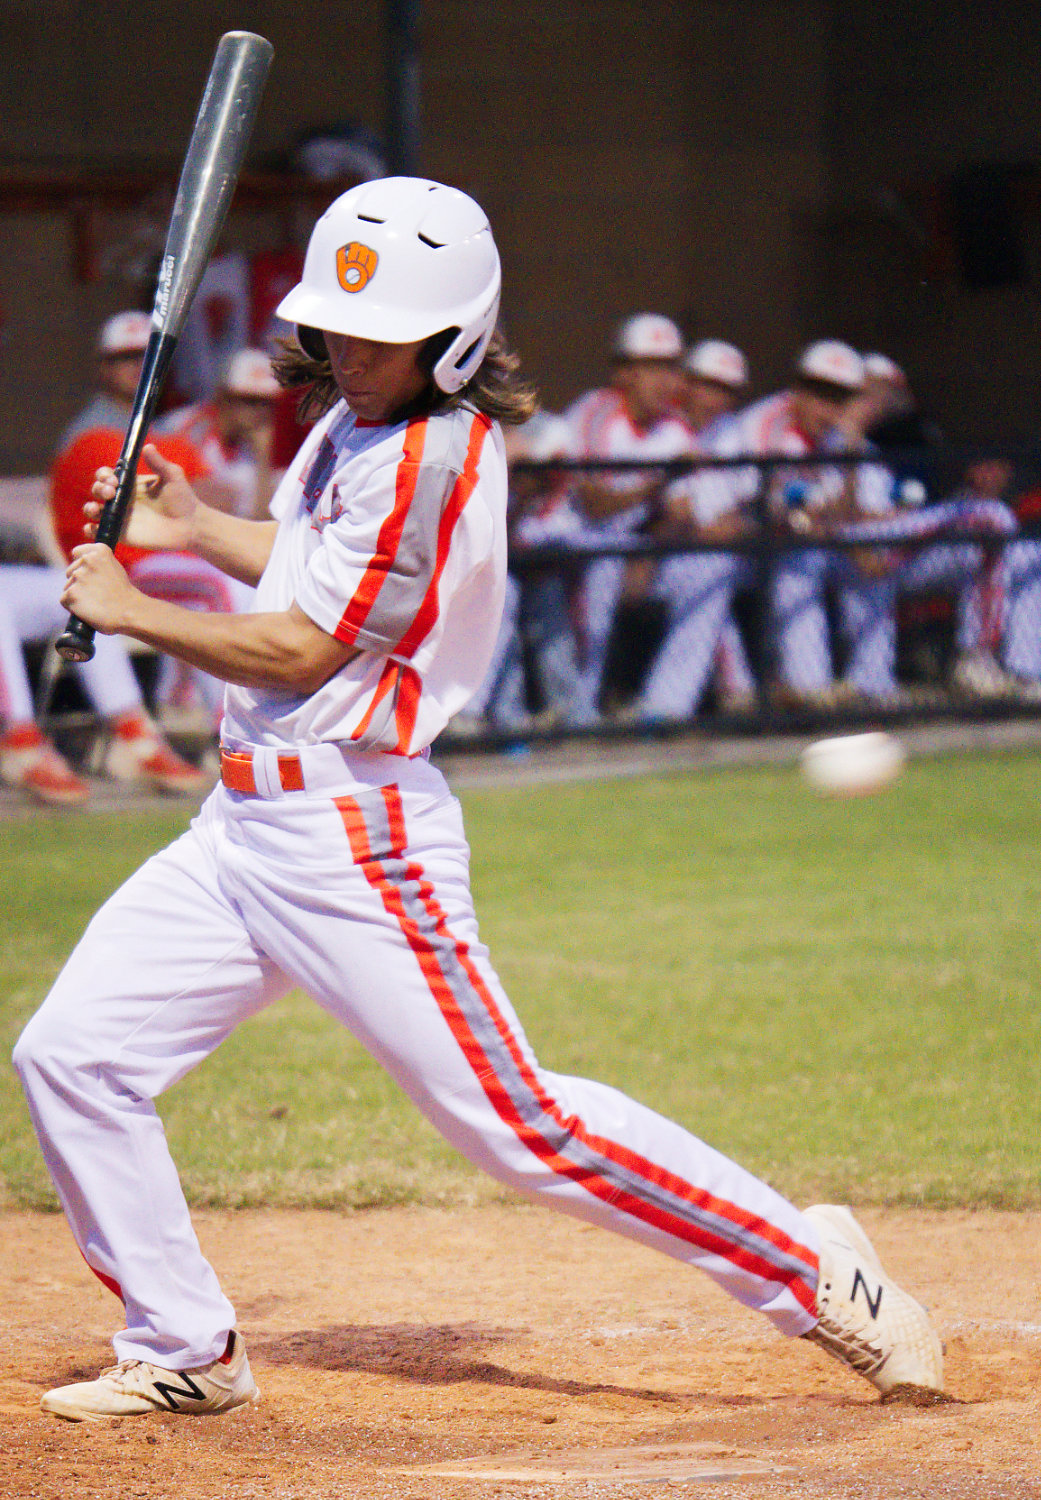 Riley Fowler tries to avoid an inside pitch but took one for the team and was awarded first base for Mineola.